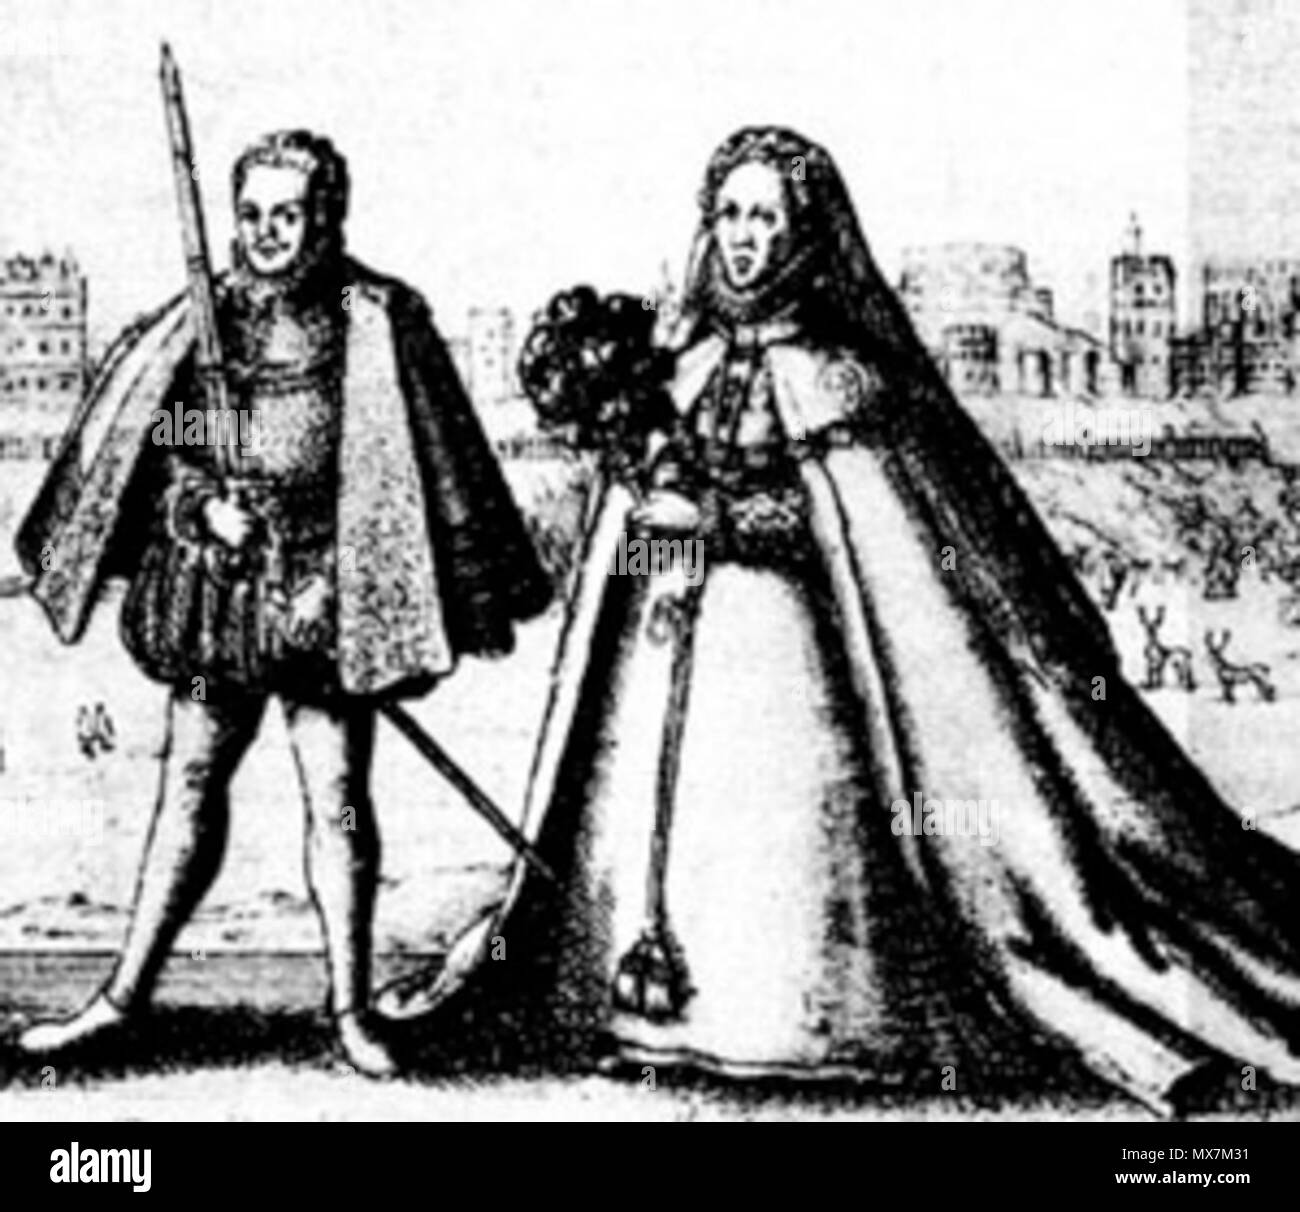 . English: Earl of Hertford (mistakenly identified as the 17th earl of Oxford on p. 190 of The de Veres of Castle Hedingham (1993) by Verily Anderson) and Queen Elizabeth I in the 1576 Procession of the Knights of the Garter. Detail of larger print. 26 May 2012. Wenceslaus (Wenzel) Hollar after Marcus Gheeraerts the Elder 176 Earl of Hertford and Queen Elizabeth I Stock Photo